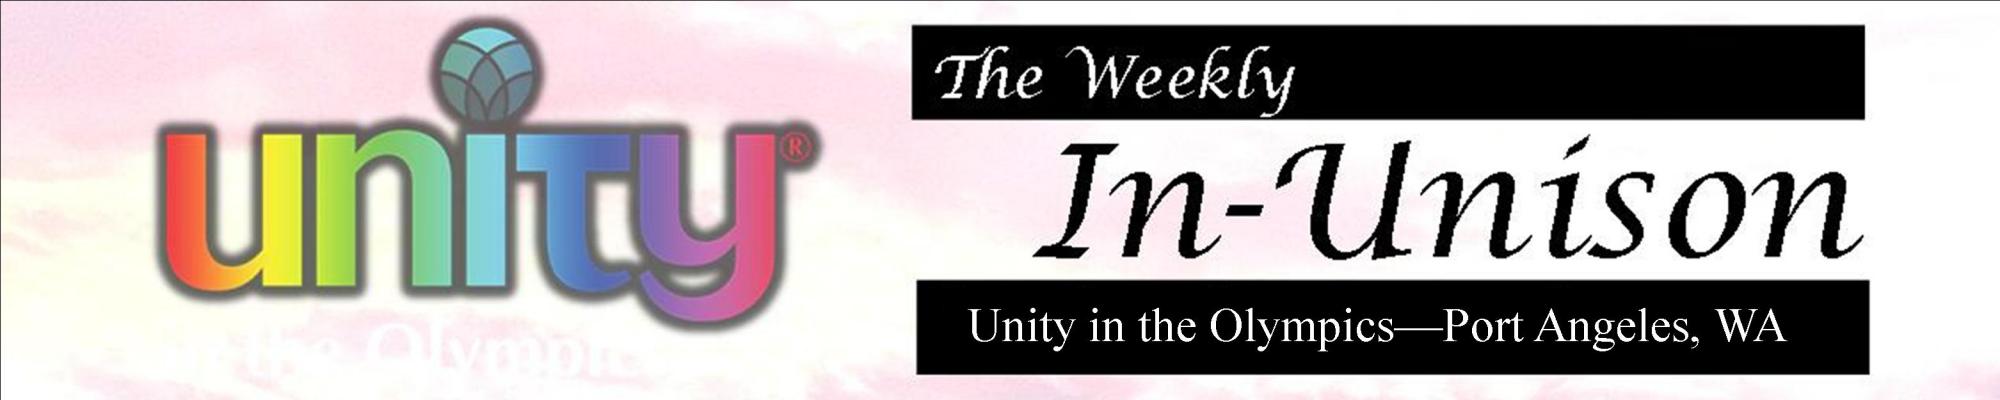 The Weekly IN-UNISON May 1, 2024 Edition